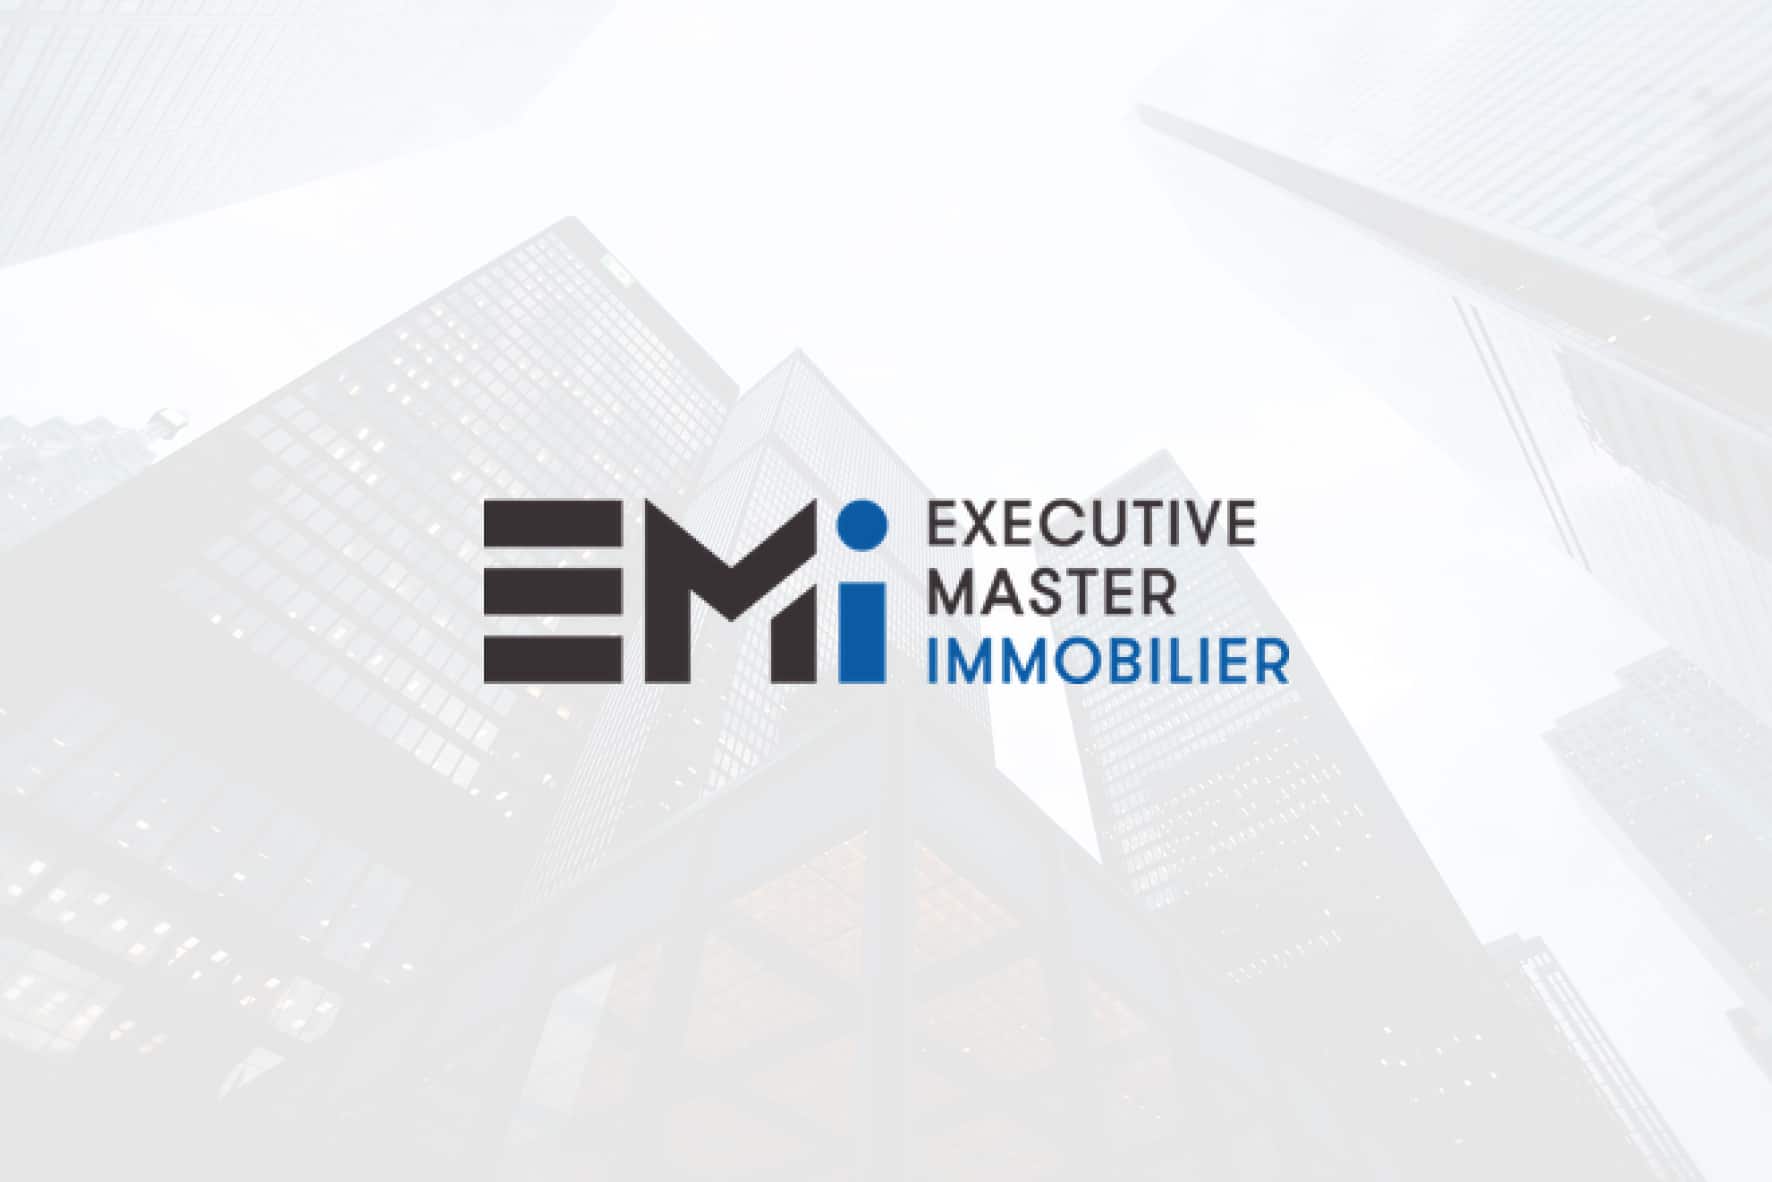 (c) Executive-master-immobilier.be